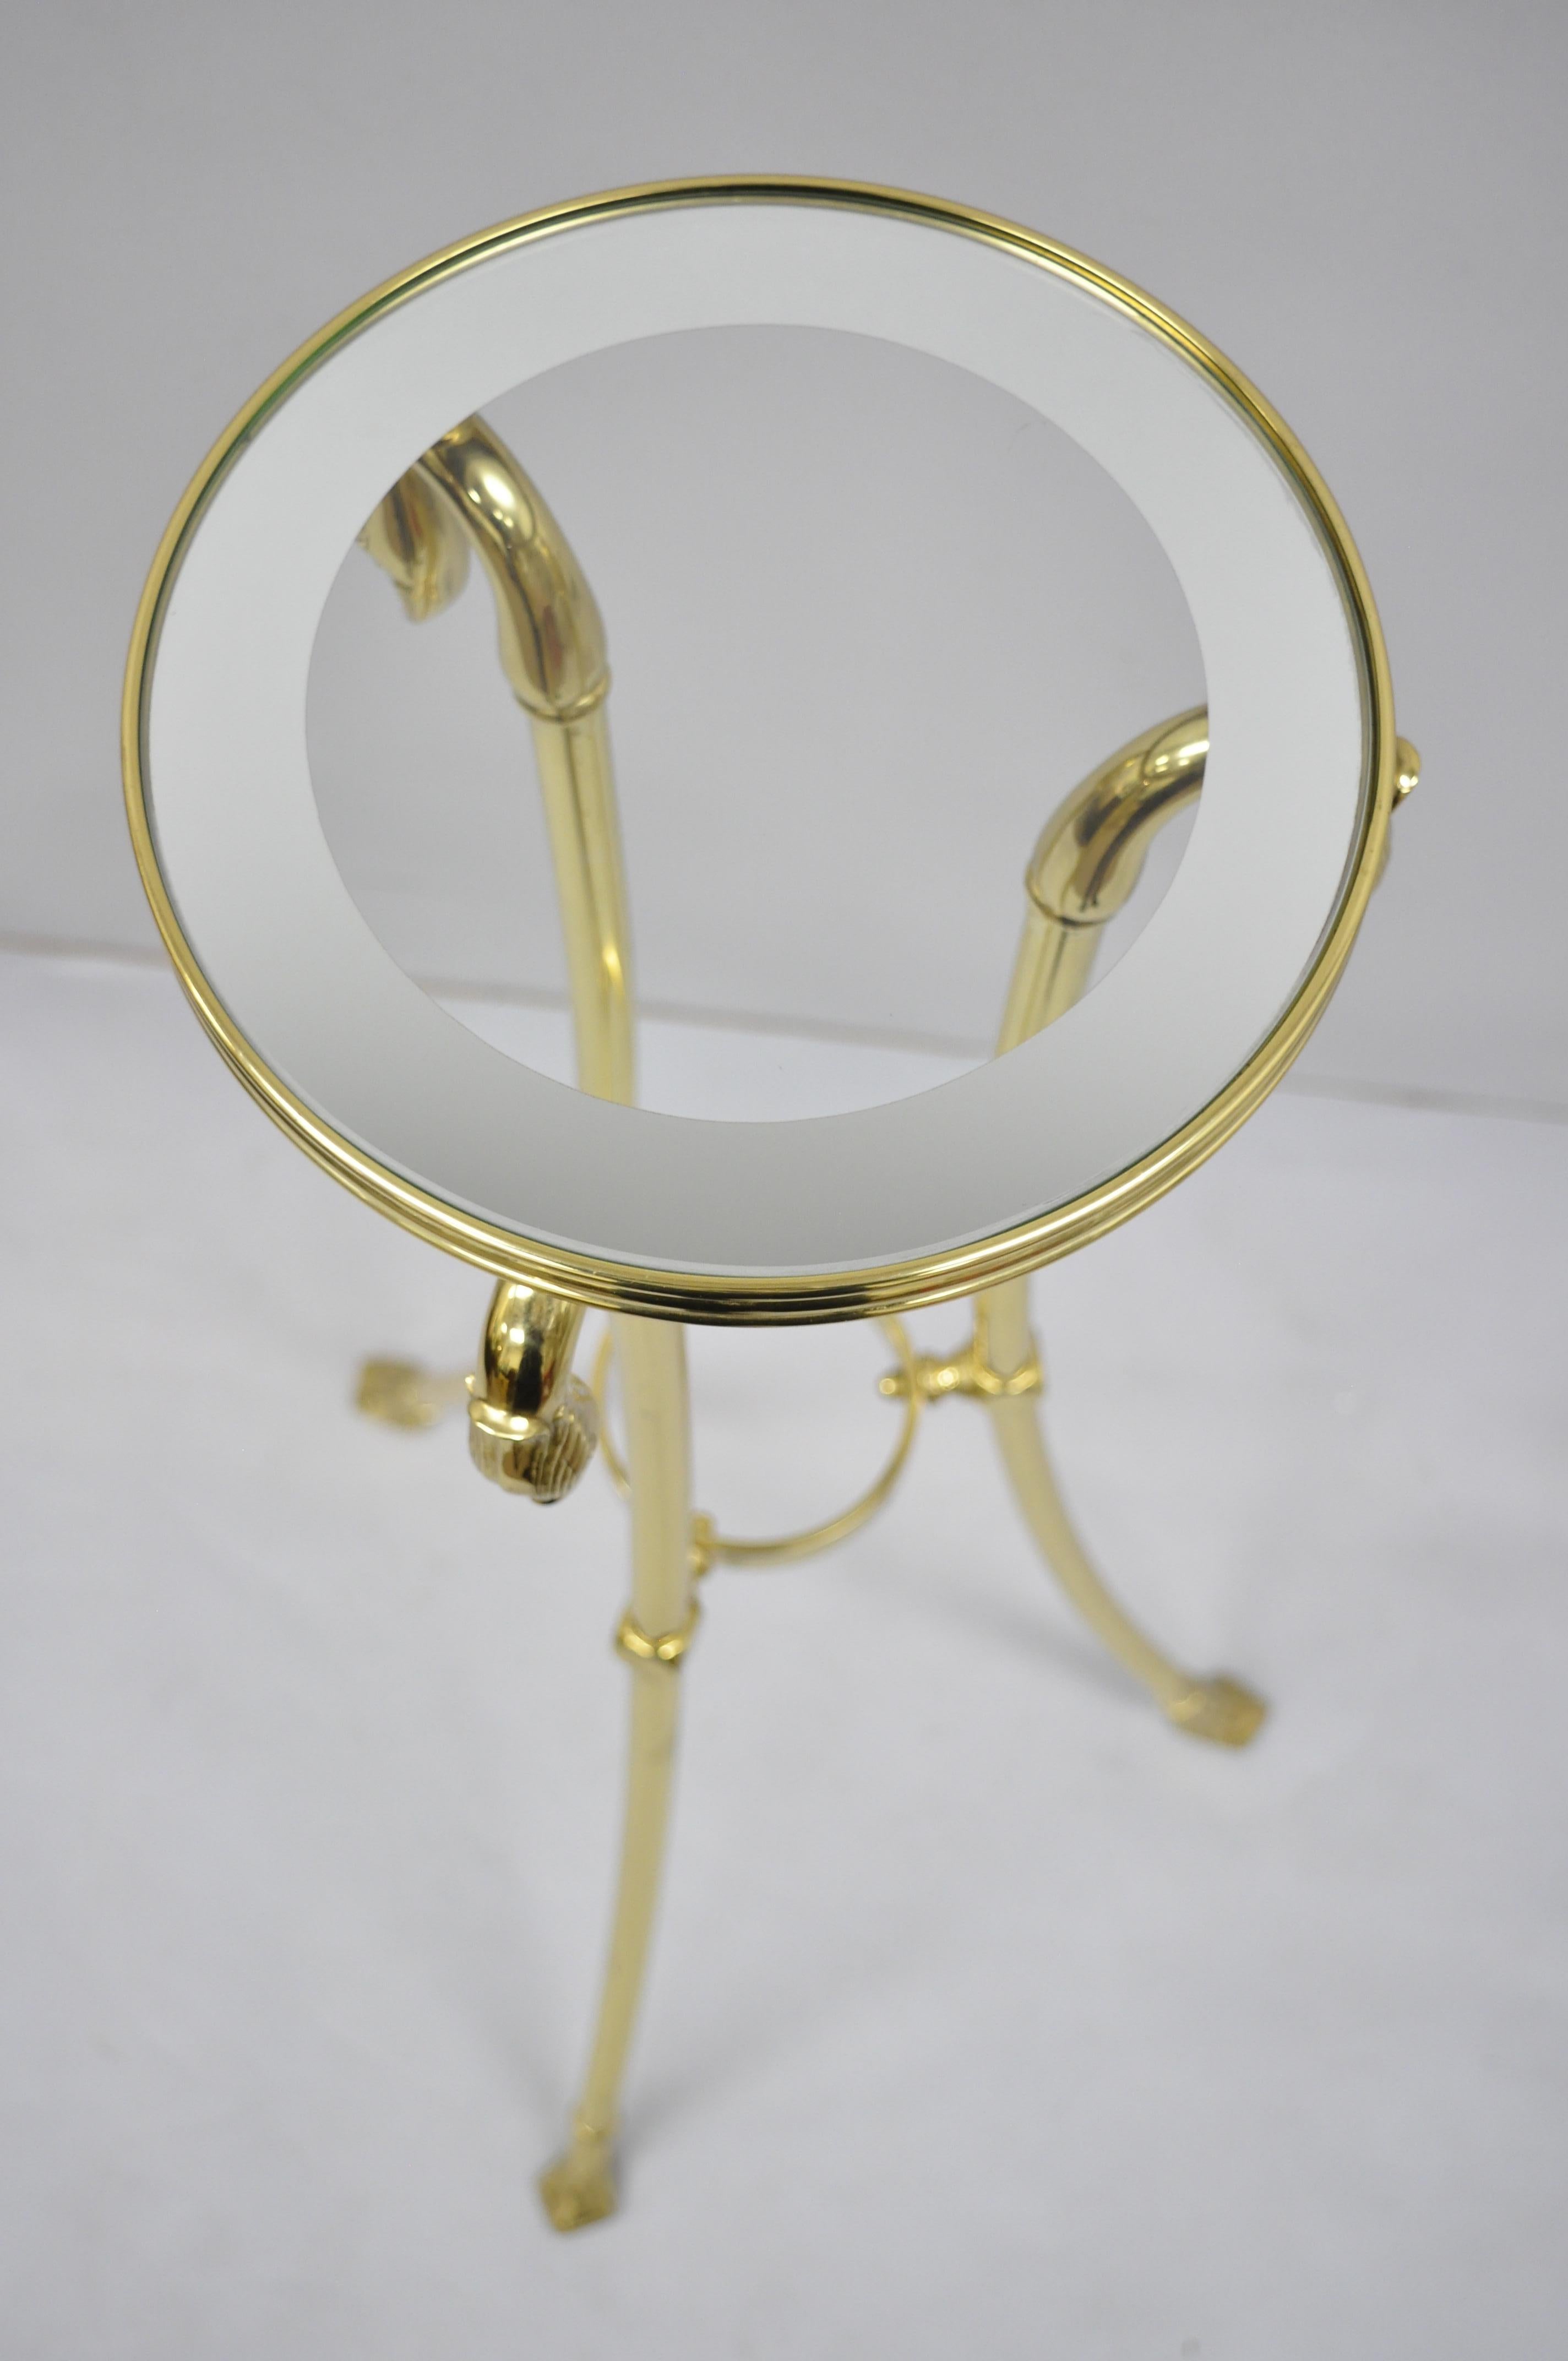 Italian Regency neoclassical style brass pedestal with swan heads. Item features polished brass frame, 3 swan heads, round glass top with mirror border, original label, great style and form, circa 1970s. Measurements: 42.5